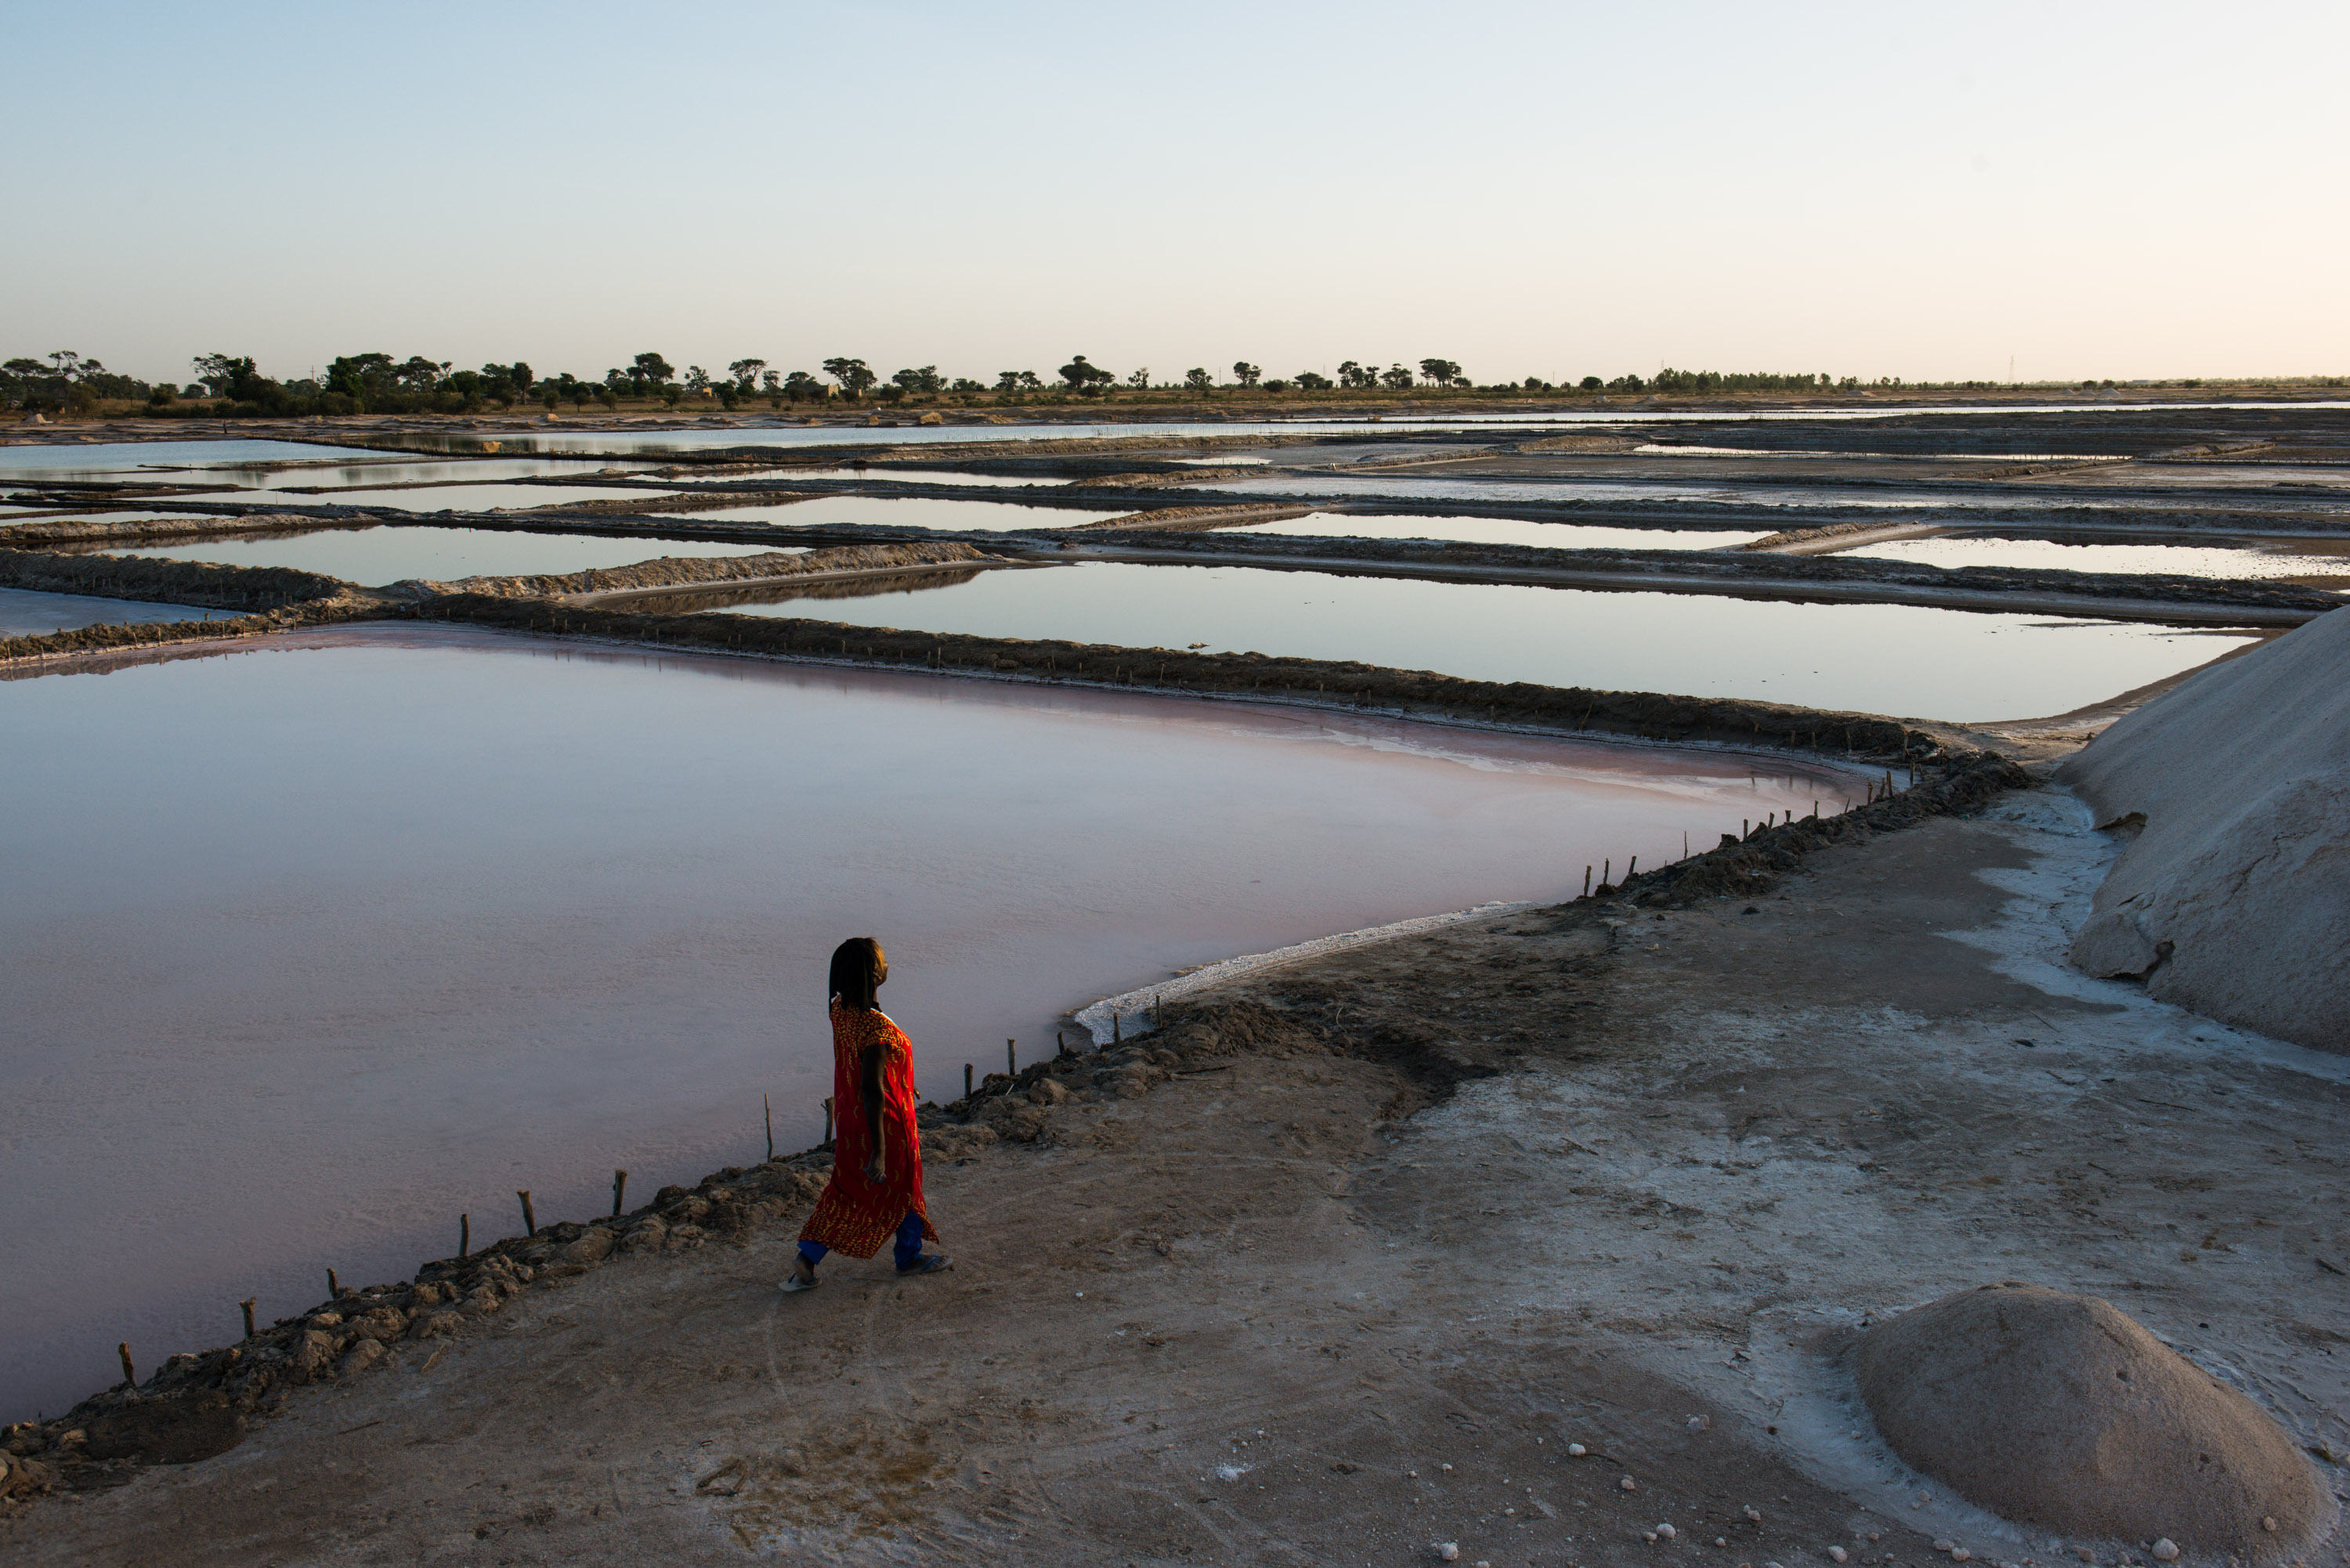 Diouf walks along the edge of irrigation pools at her salt flat in Fatick. In the coming months, the water will evaporate, leaving salt behind.